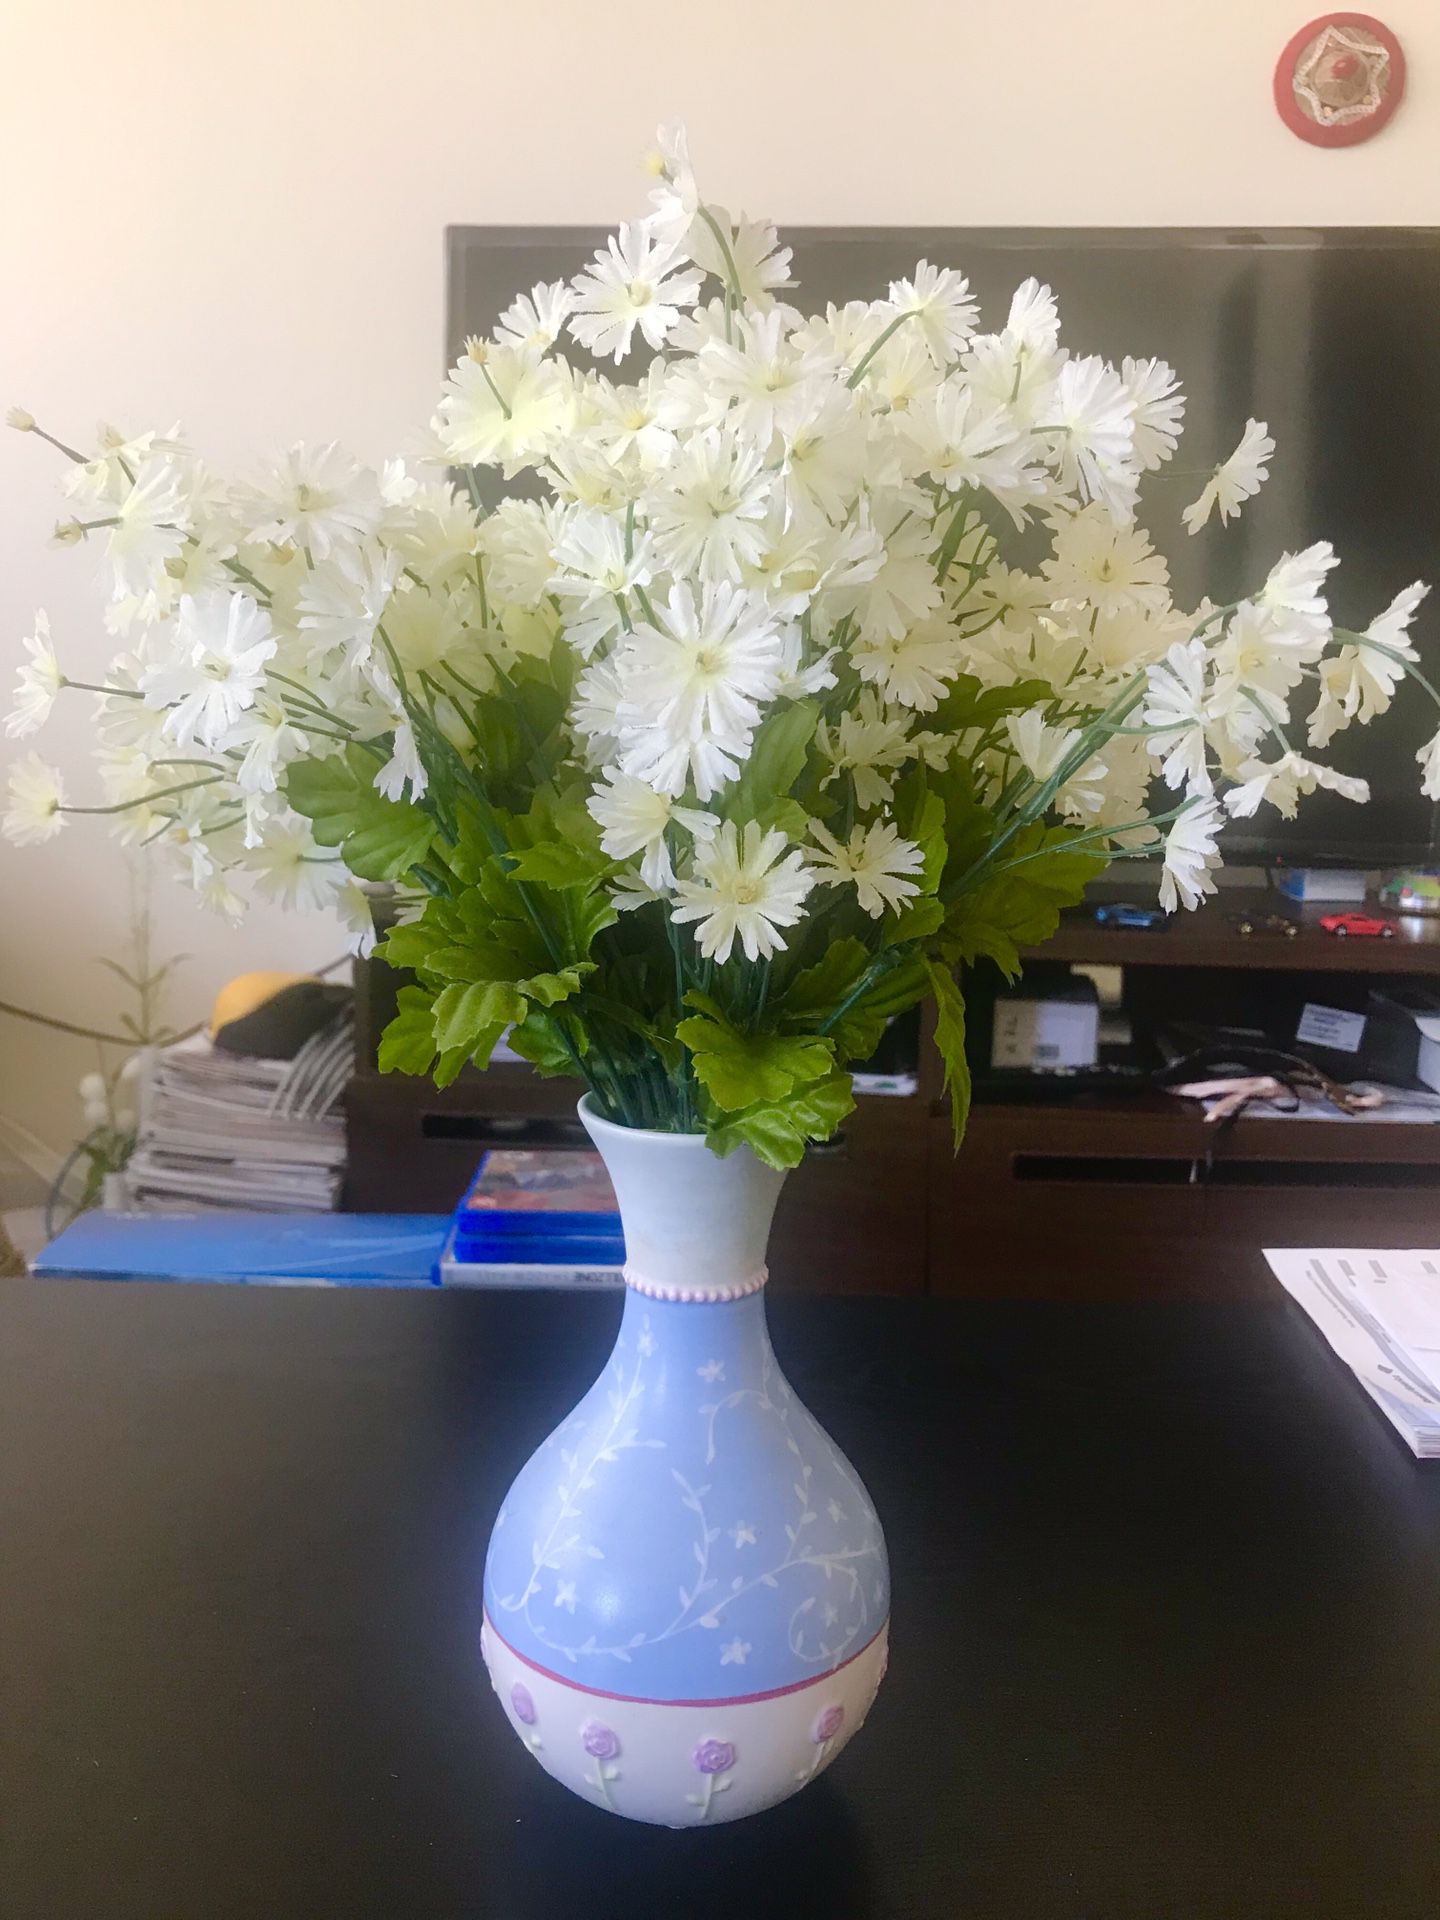 Vase with flower